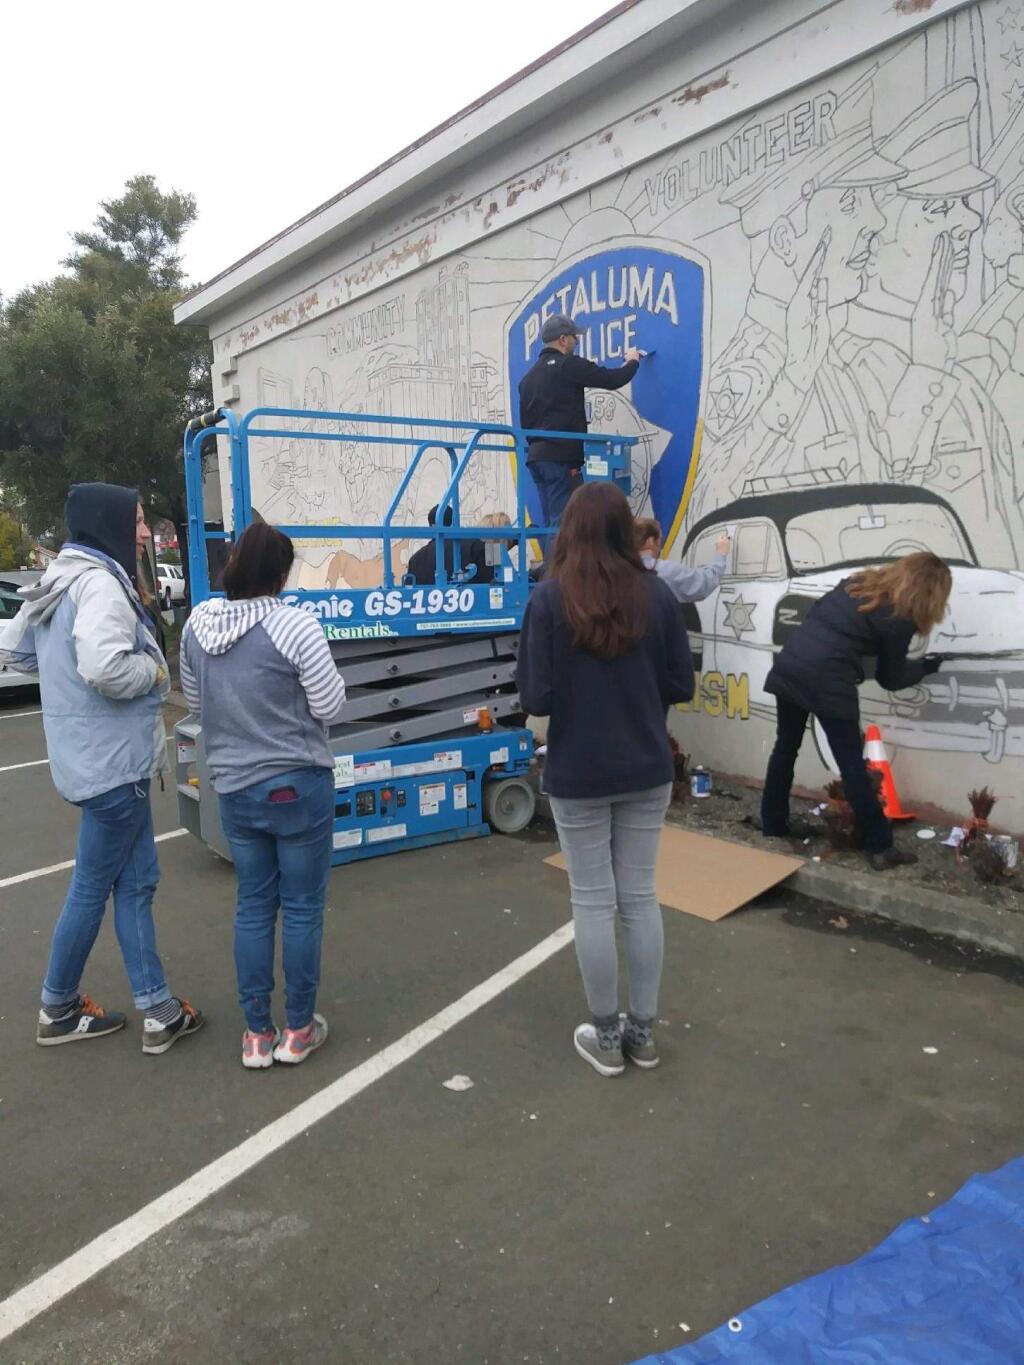 JOHN JACKSON/ARGUS-COURIER STAFFSt. Vincent High School students paint a mural on the back of the Petaluma Police station, just one of many projects they undertook on their Day of Service.